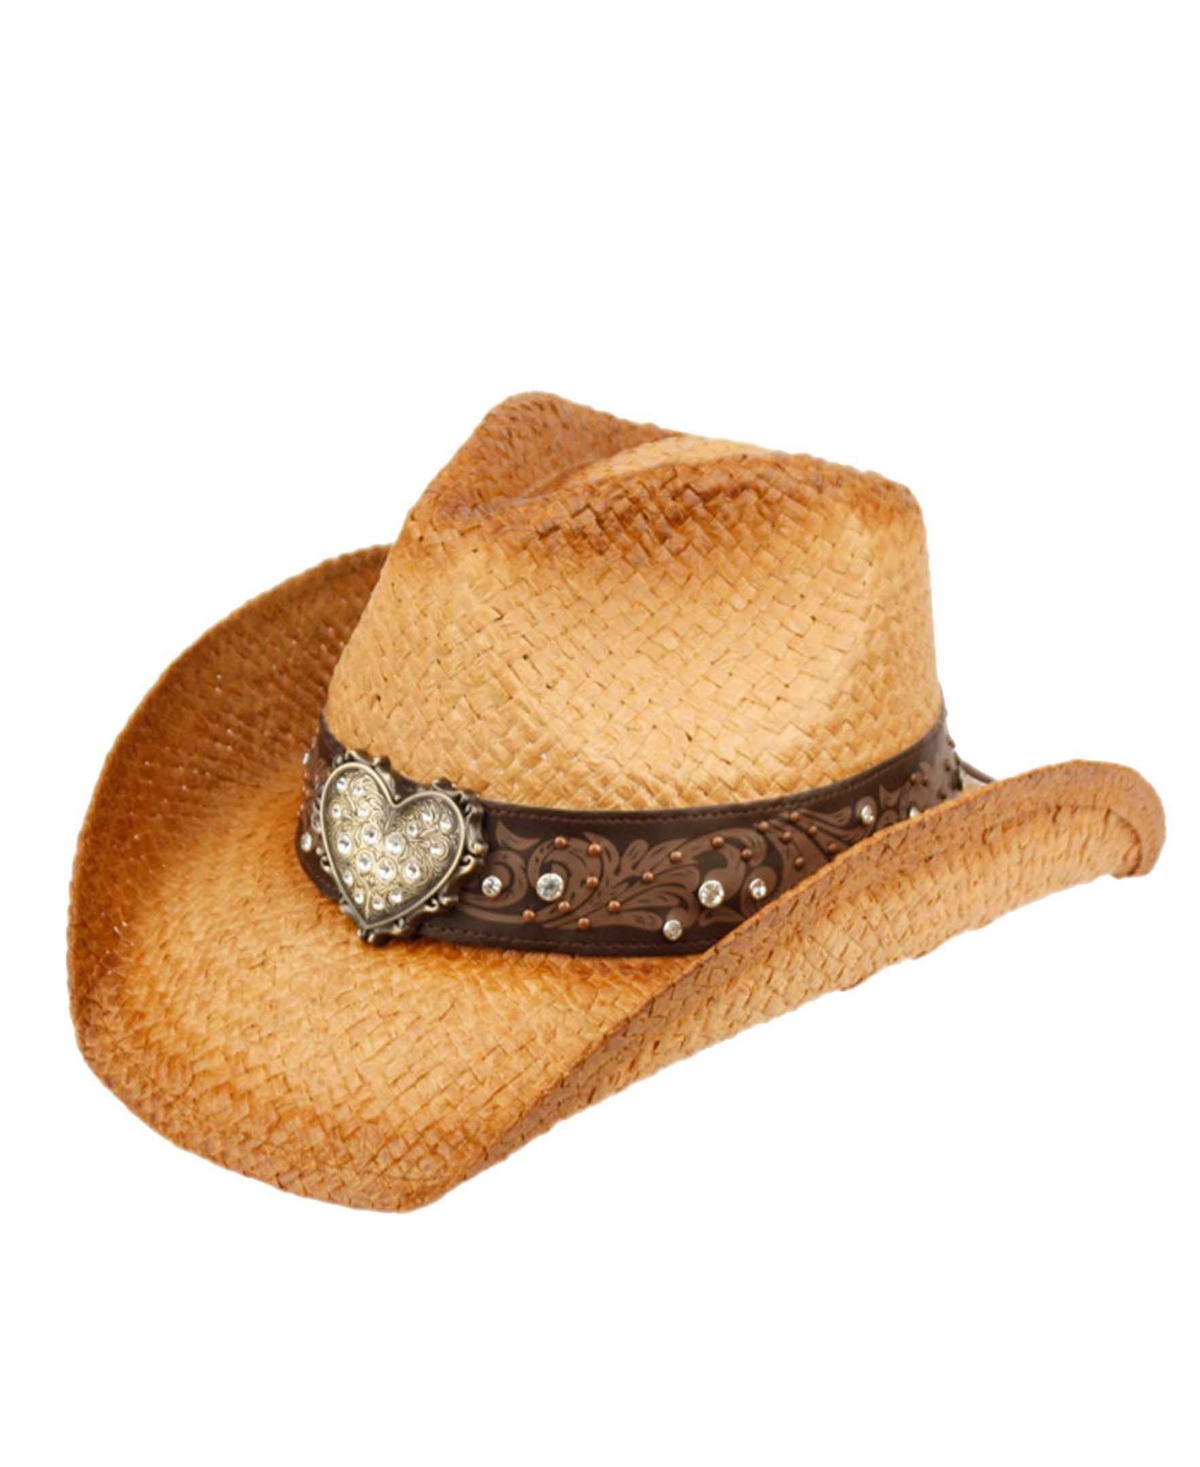 Epoch Hats Company Cowboy Hat with Trim Band and Studs